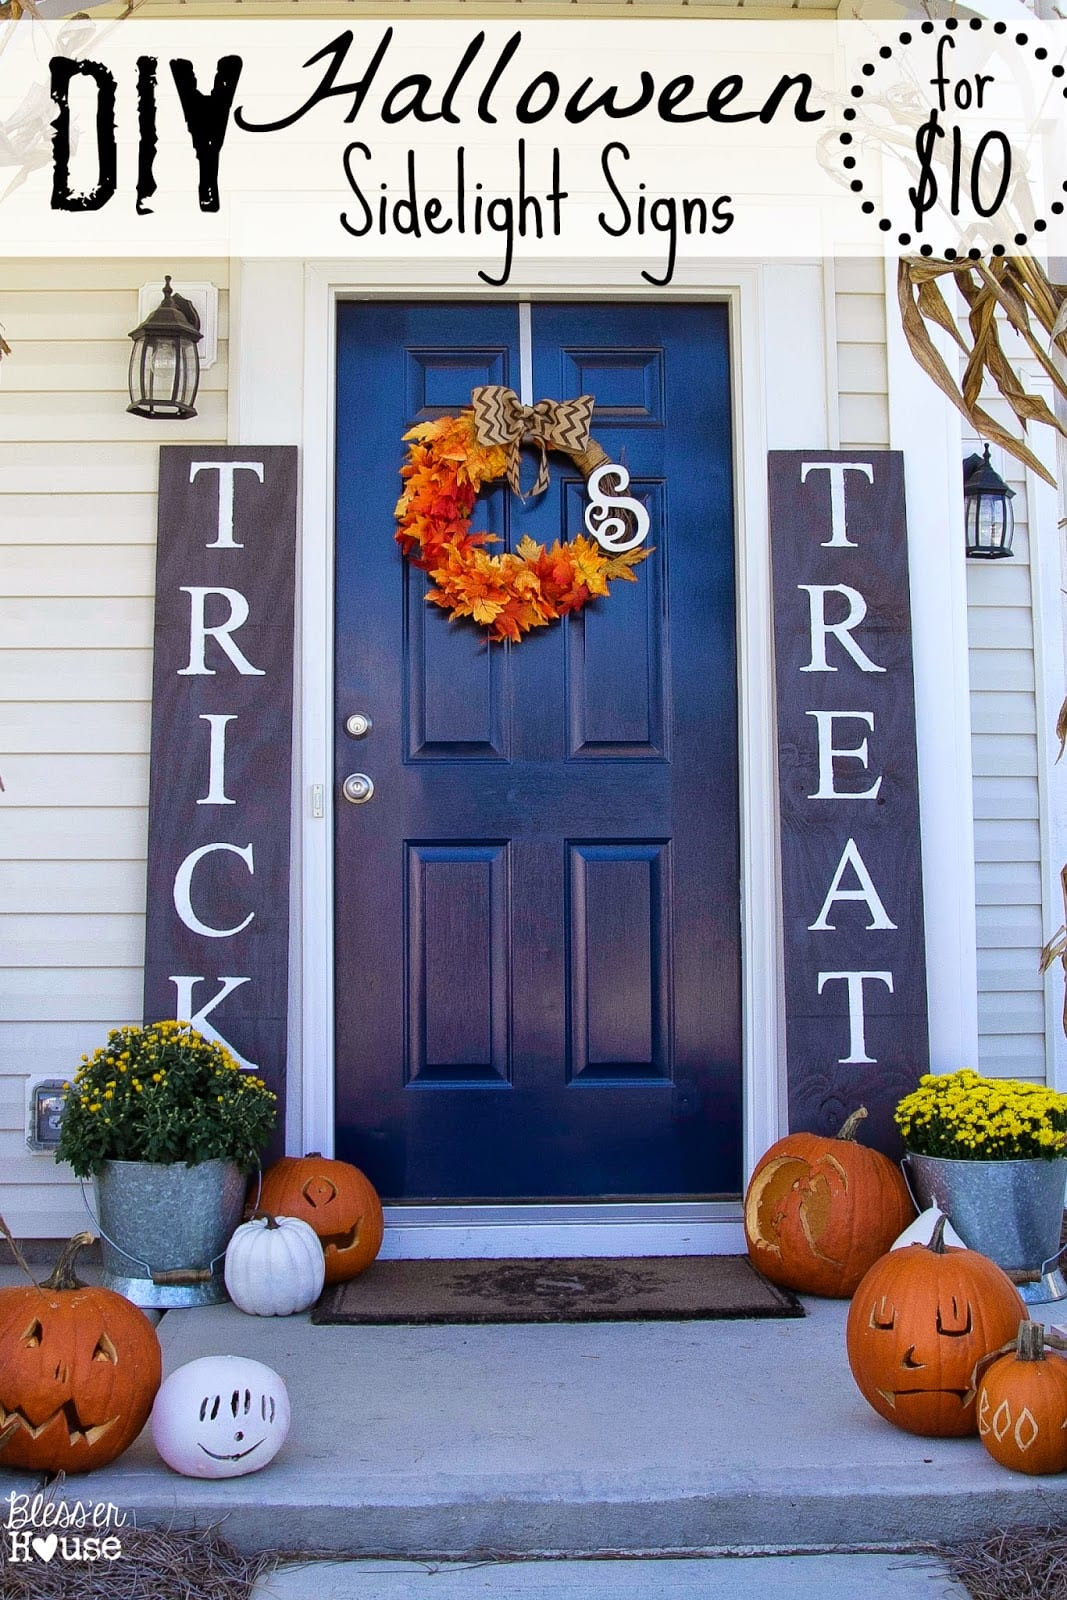 DIY Halloween Wood Signs
 DIY Halloween Sidelight Signs and Fall Porch Reveal